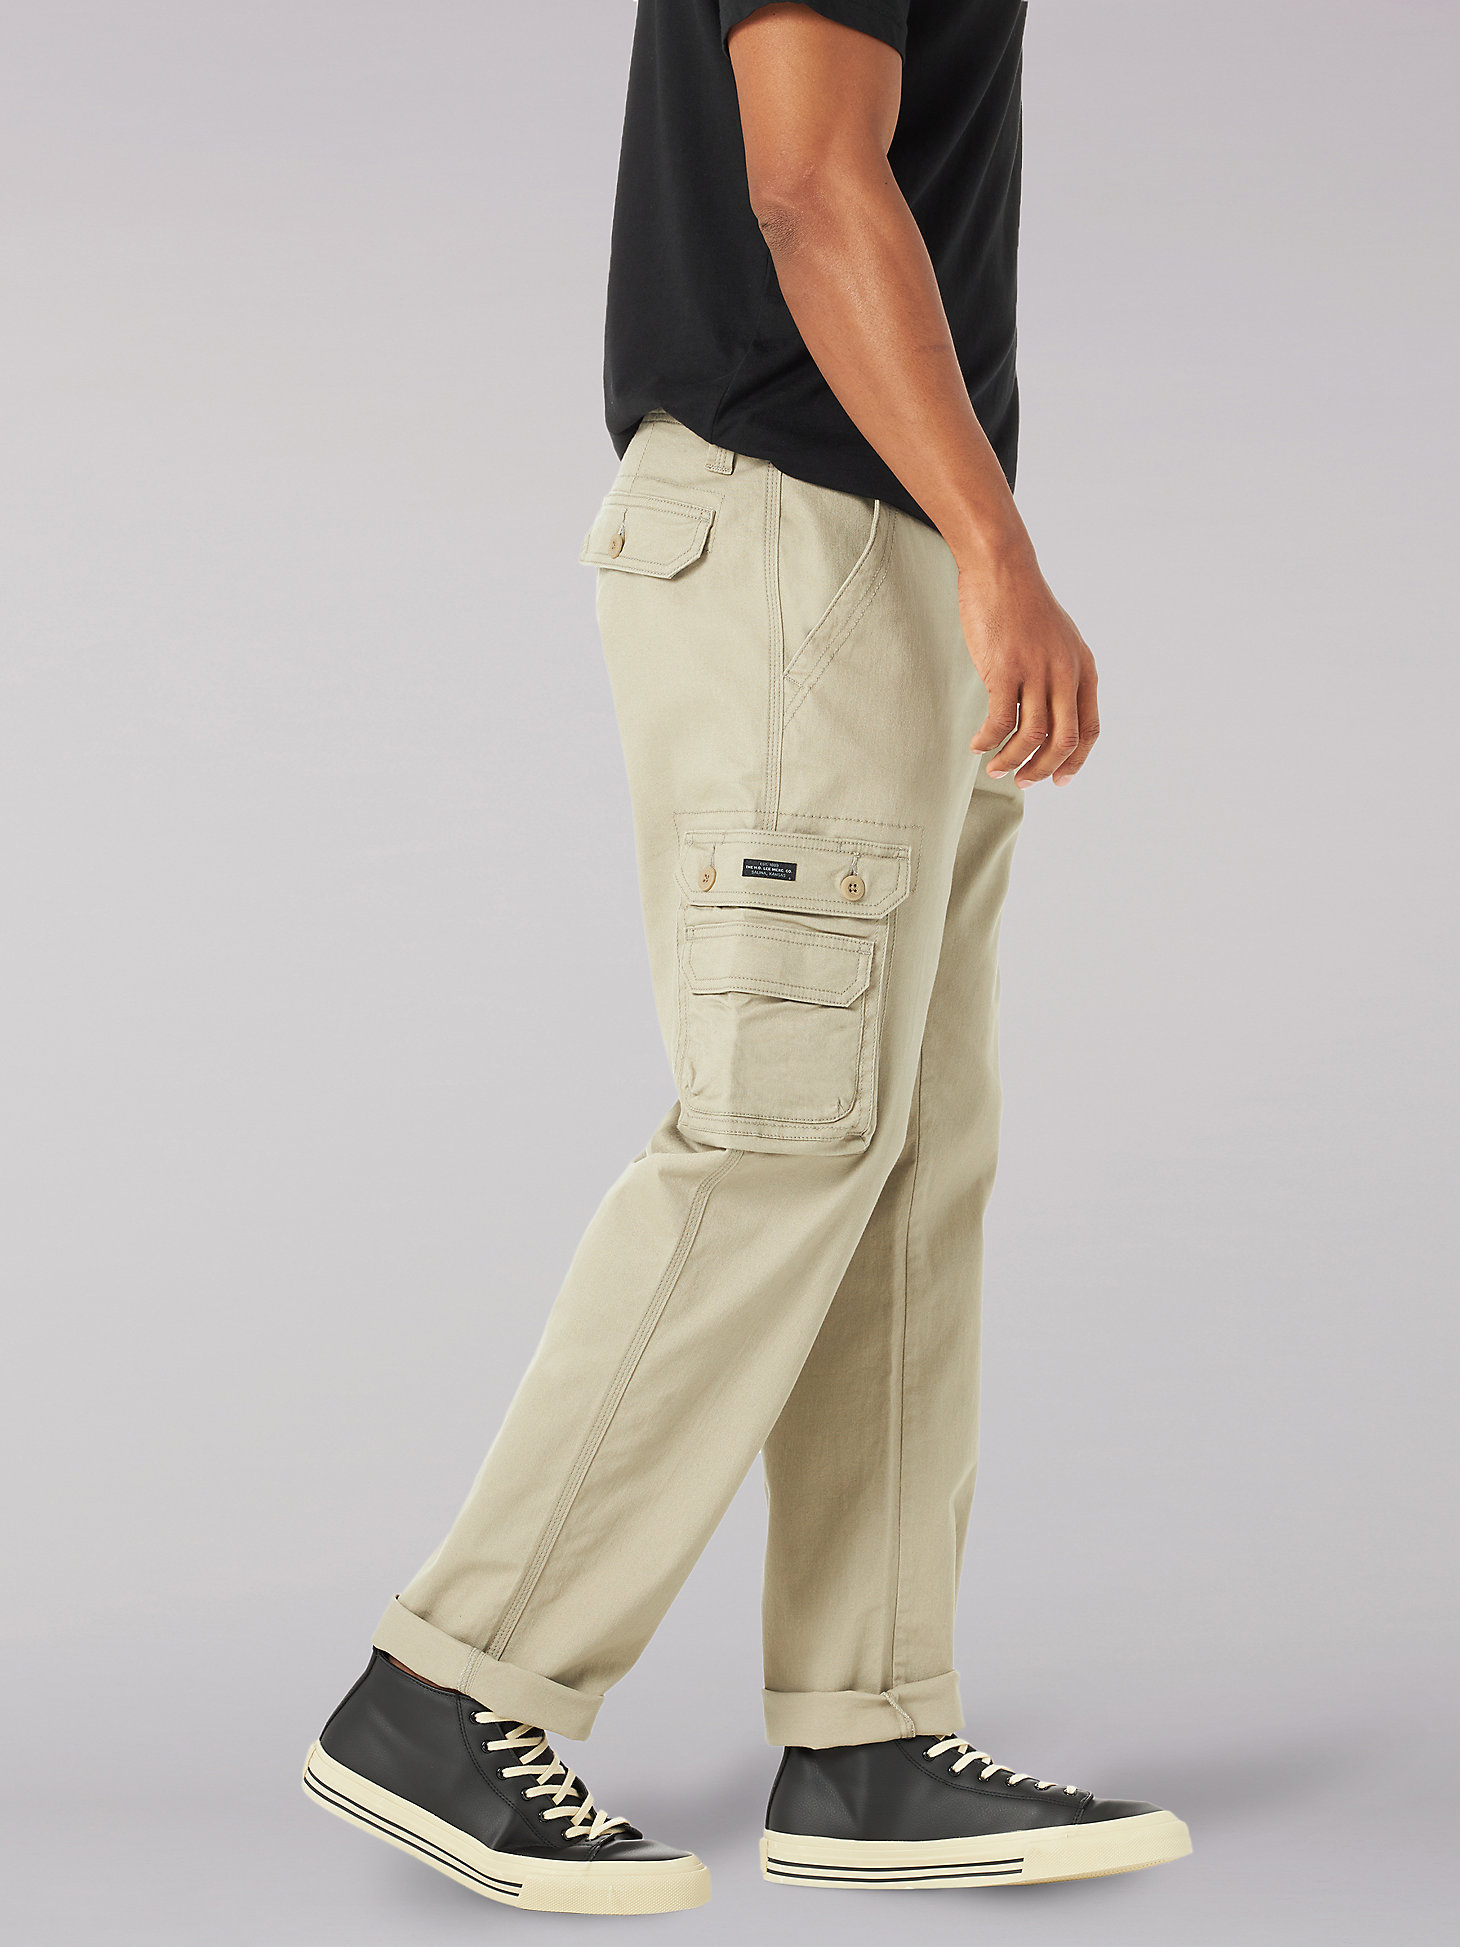 Men's Wyoming Relaxed Fit Cargo Twill Pant in Pebble alternative view 2